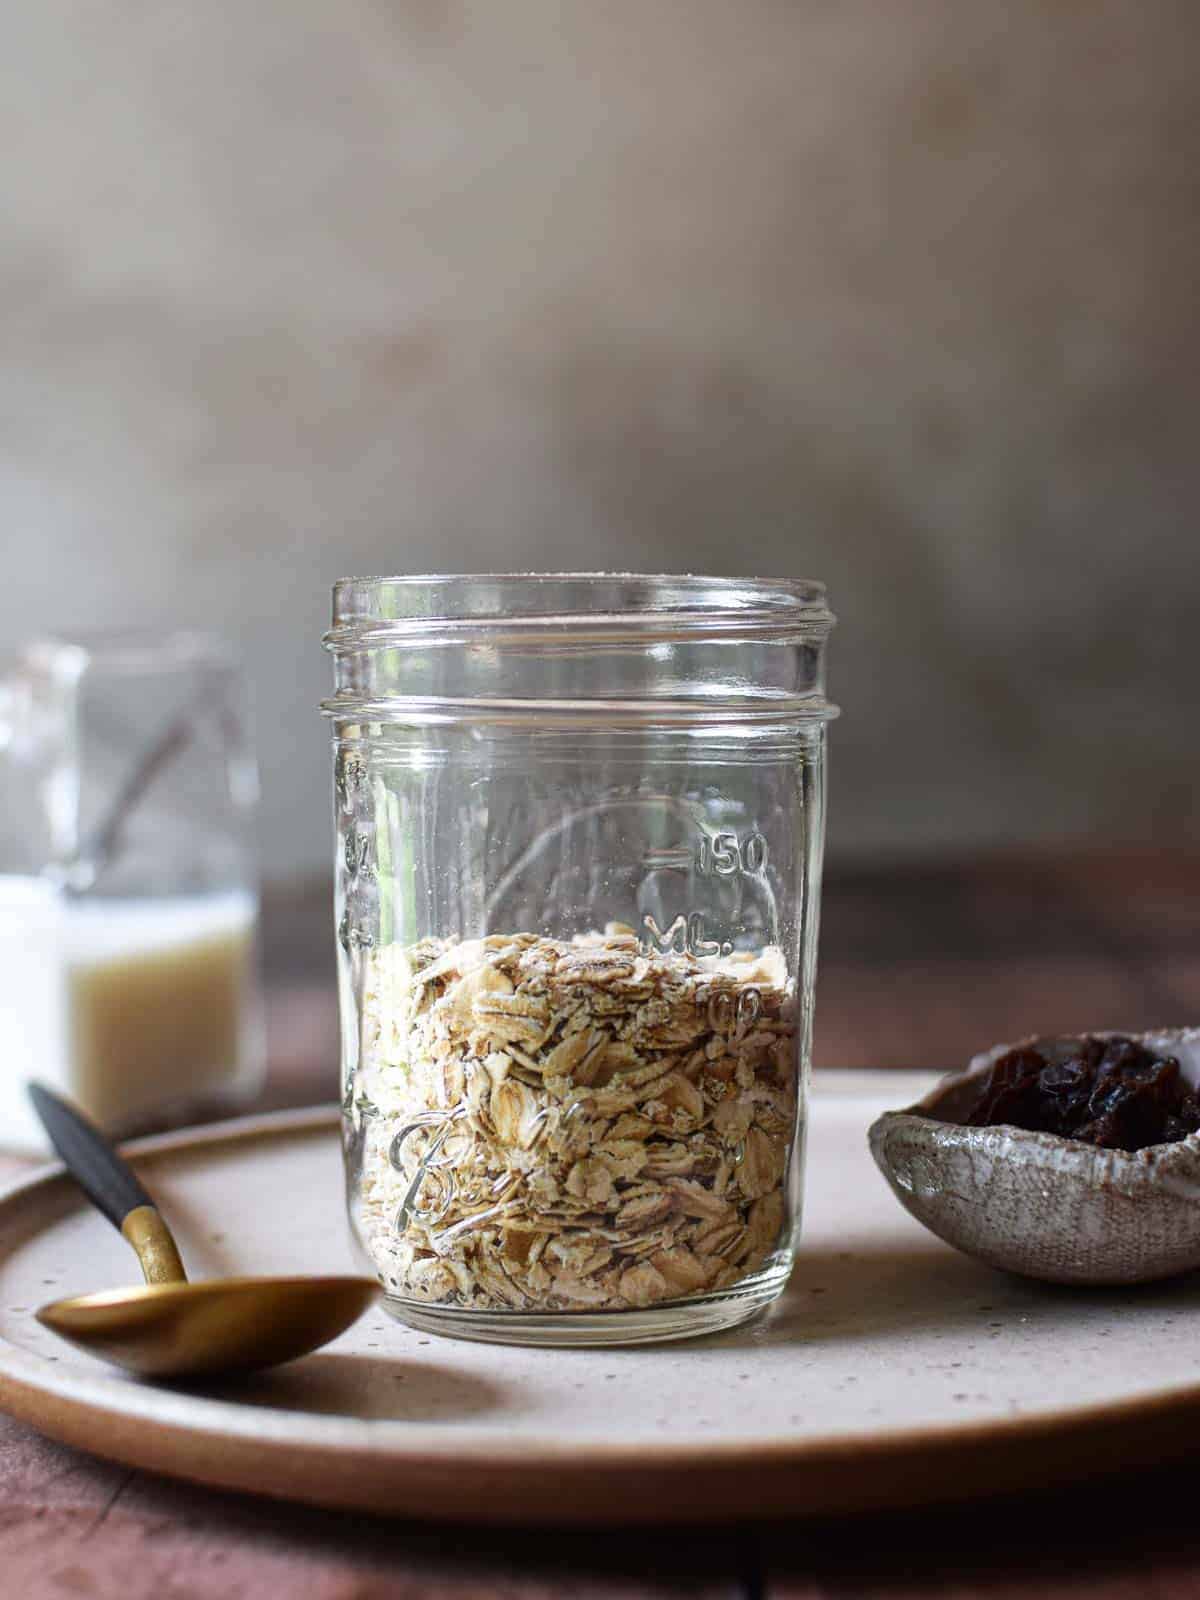 Oats in a jar on a brown plate.